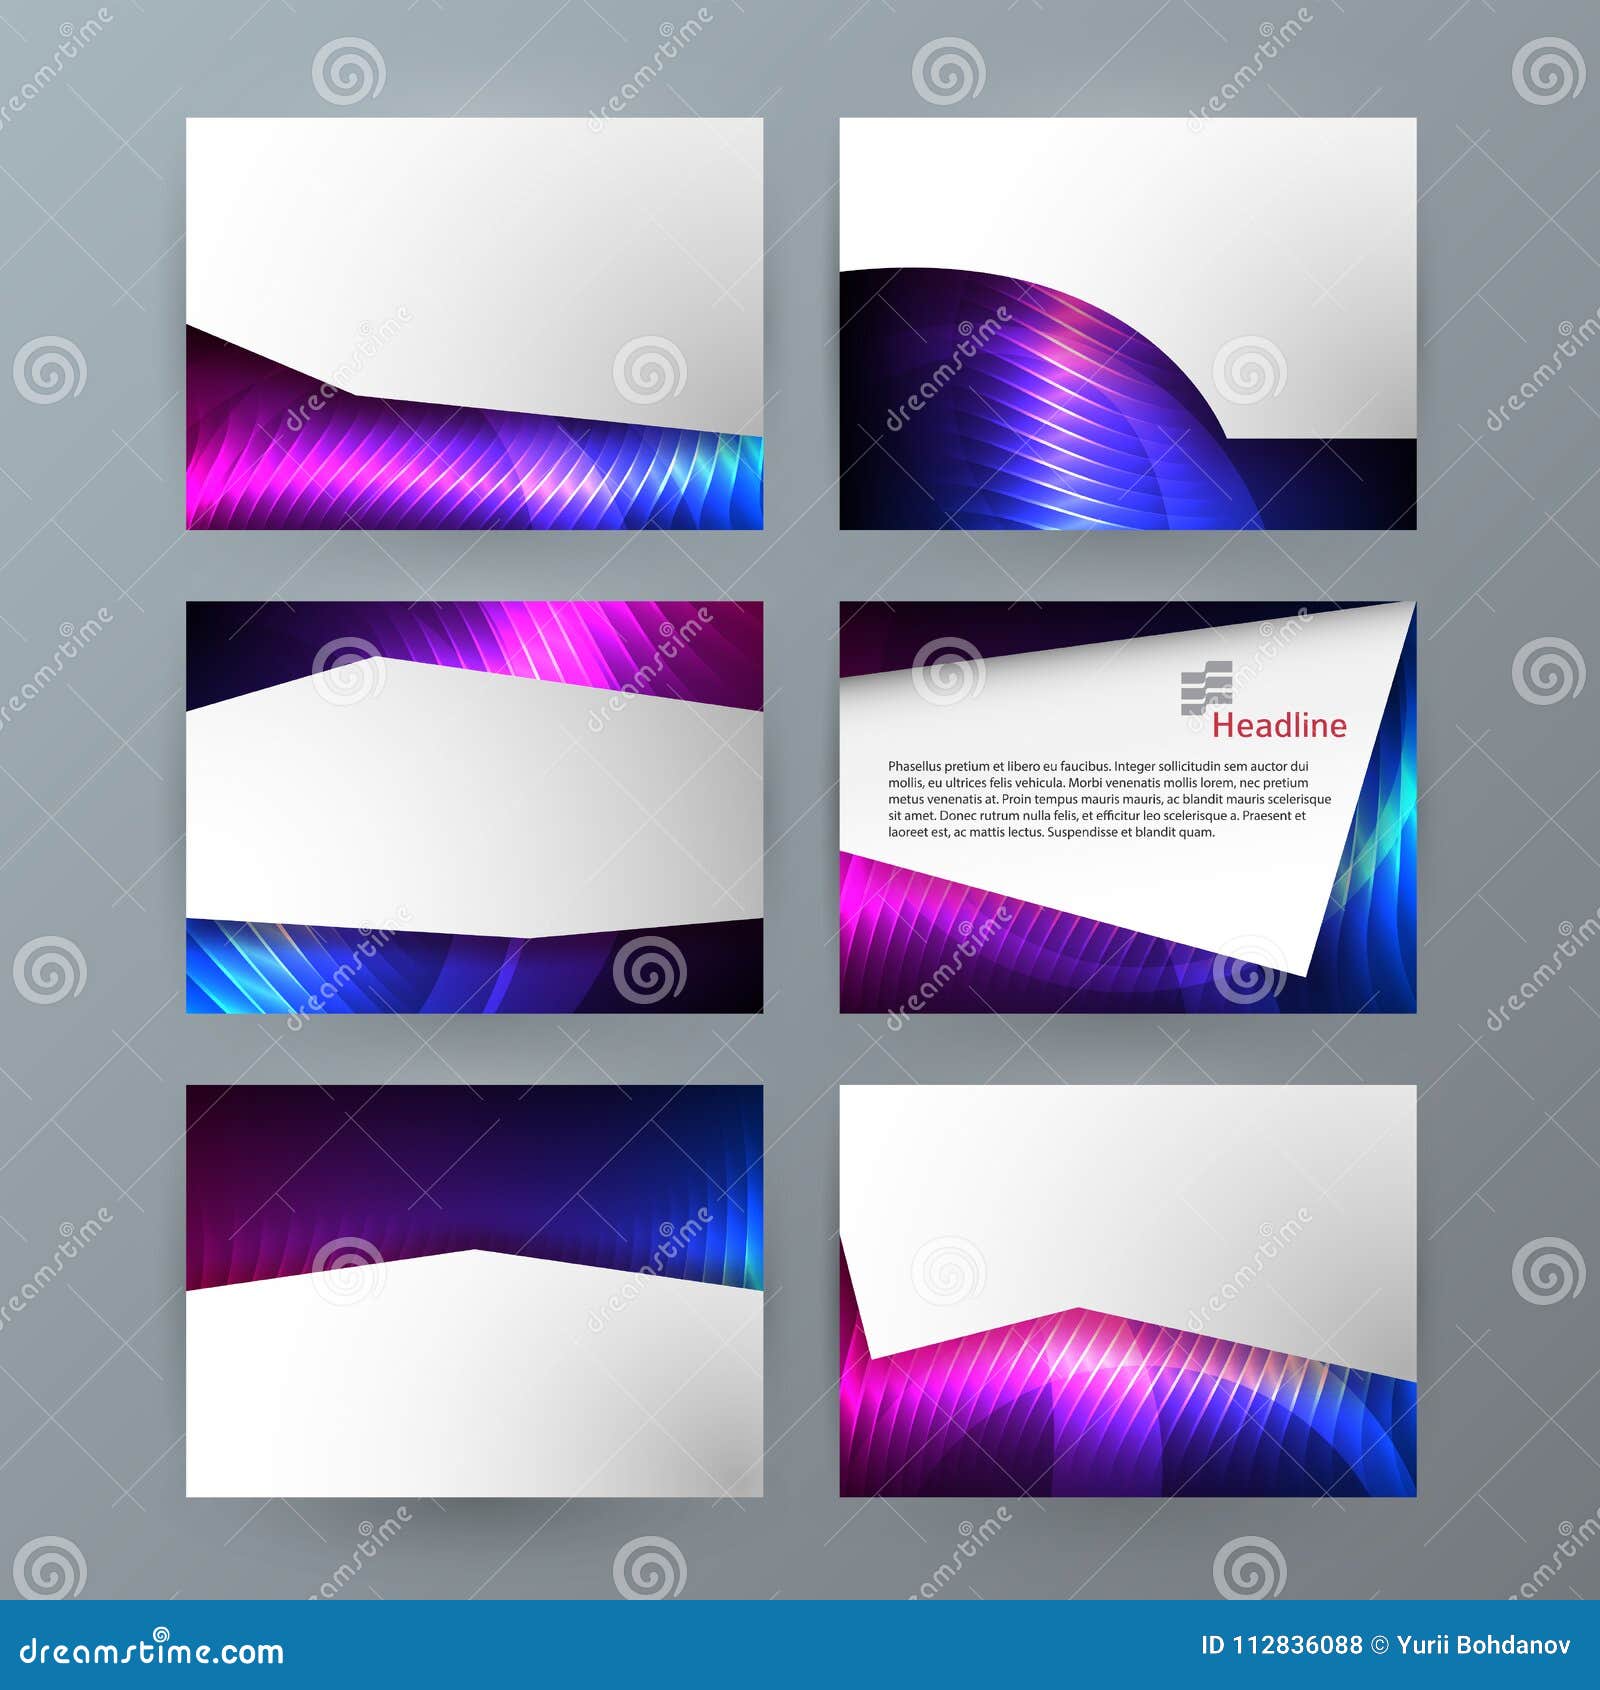 Presentation Template Powerpoint Background Aurora Boreal Neon E Stock  Vector - Illustration of abstract, background: 112836088